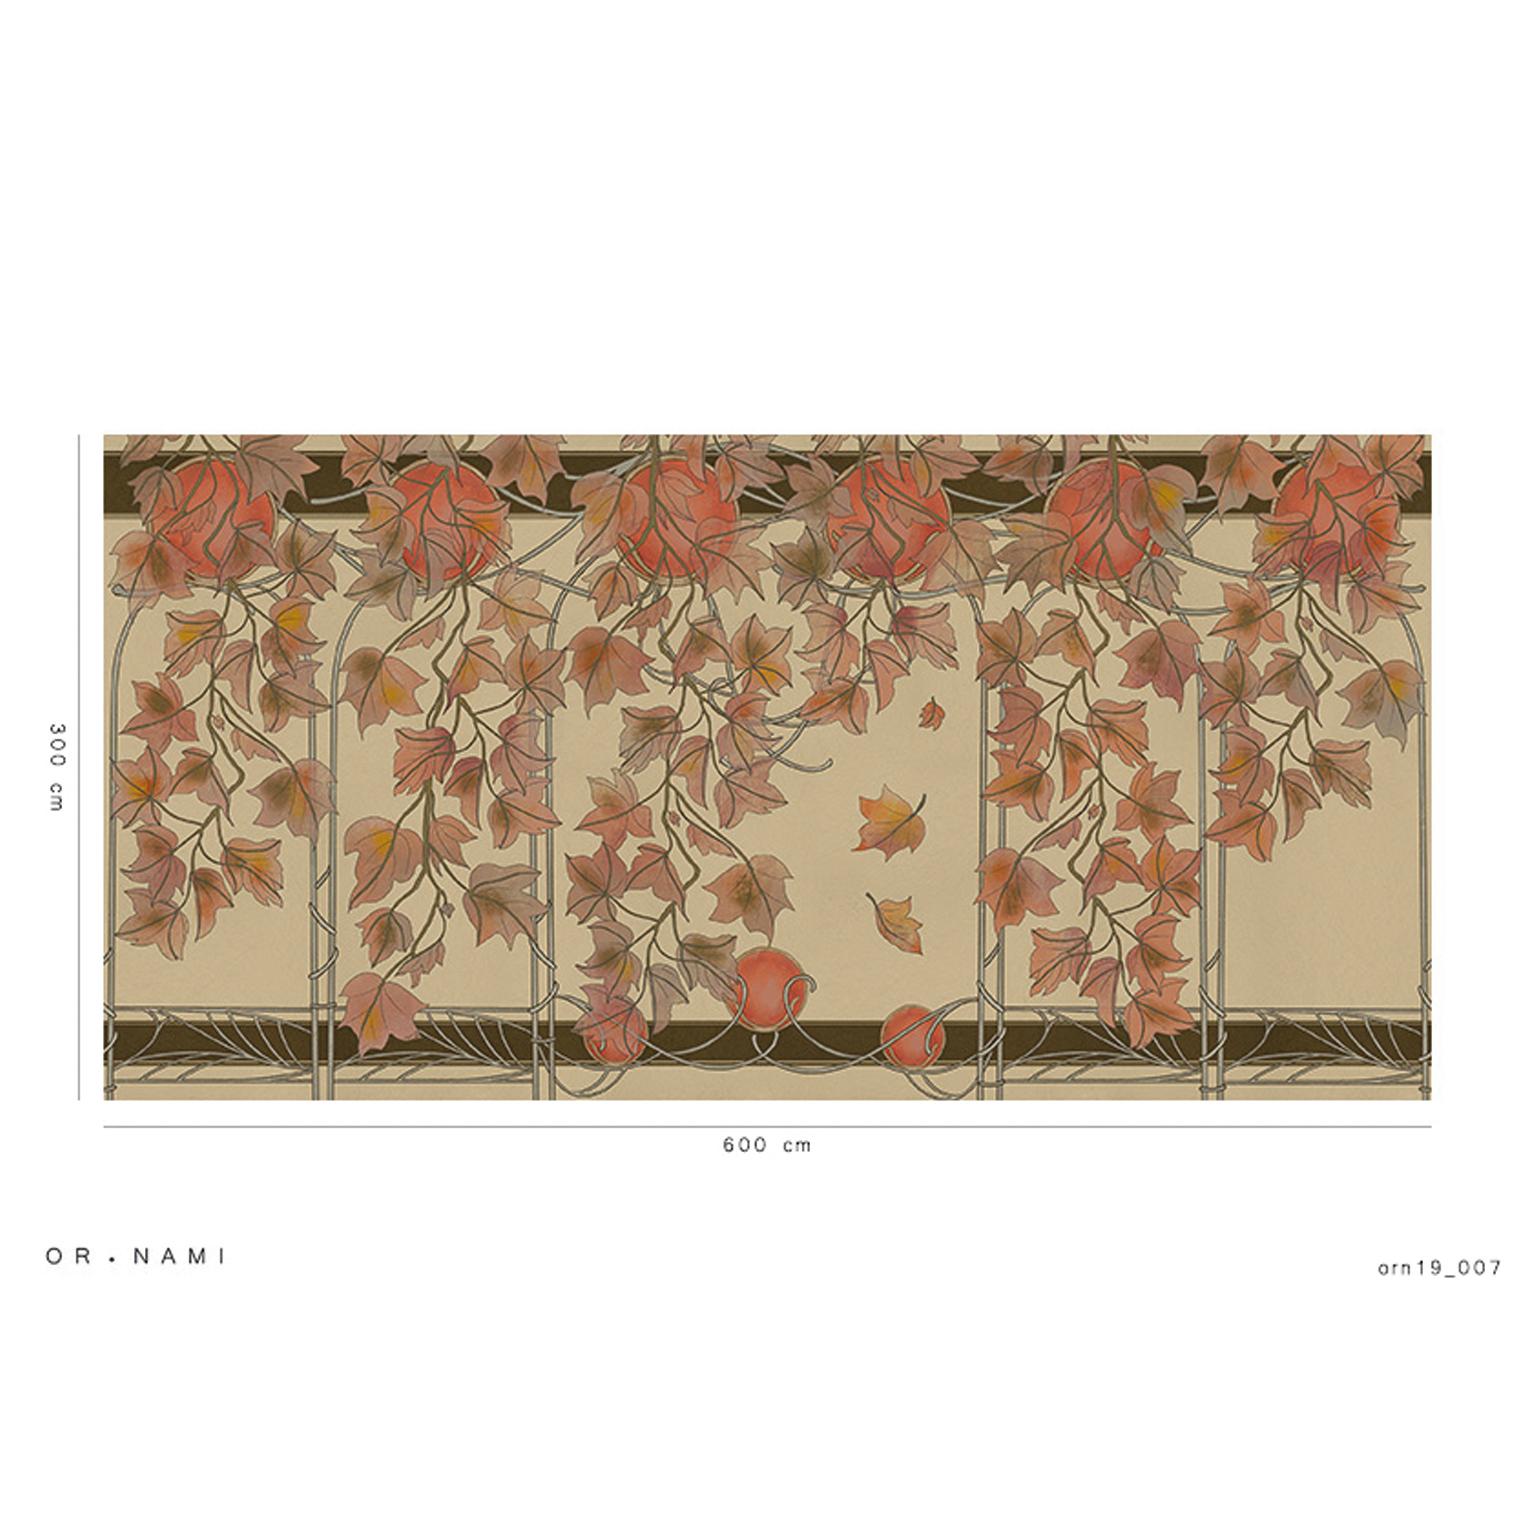 Contemporary Ornami Art Nouveau Autumn Vinyl Wallpaper Made in Italy Digital Printing For Sale